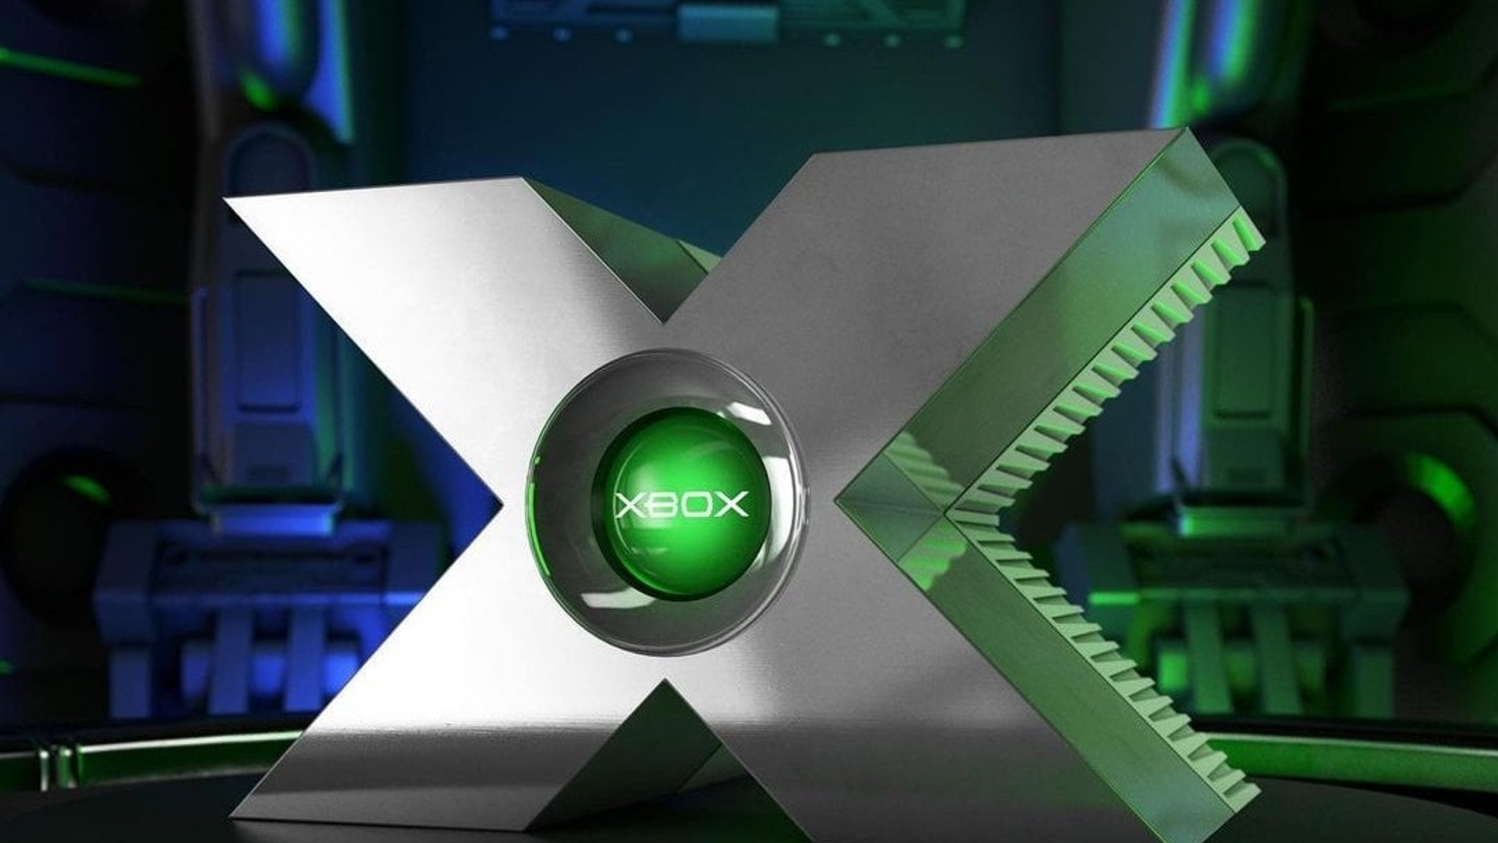 Next Generation Playstation And Xbox Arrive : NPR